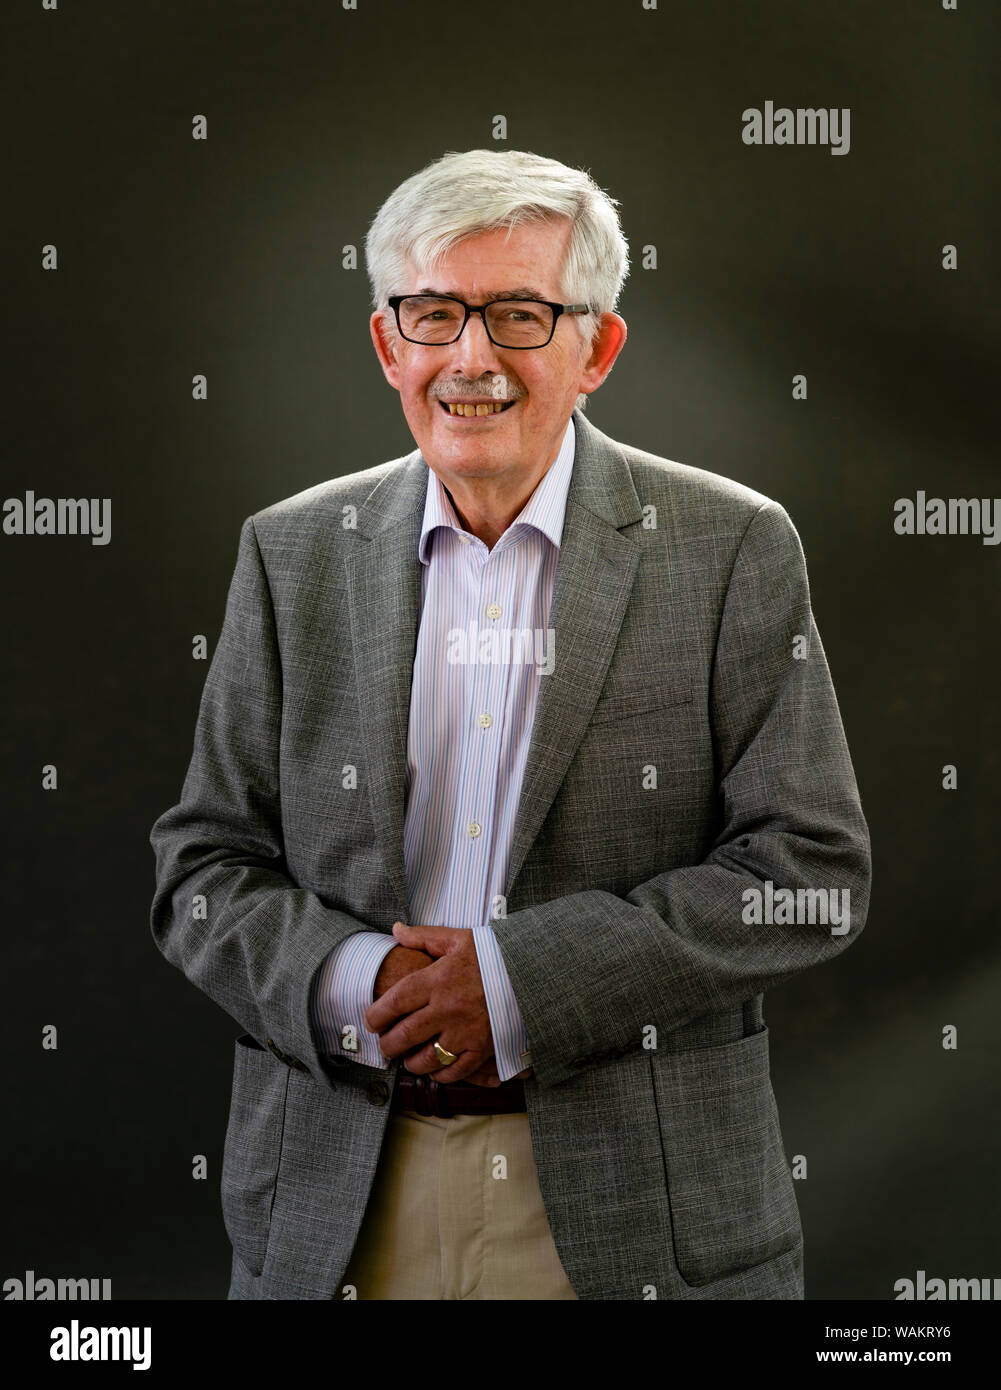 Edinburgh, Scotland, UK. 21 August 2019. Finlay McKichan at Edinburgh International Book Festival 2019. Historian Finlay McKichanÕs study, Lord Seaforth, reassesses the story of Francis Humberston MacKenzie, former Governor of Barbados and slave plantation owner who fought for slaves rights. Iain Masterton/Alamy Live News. Stock Photo